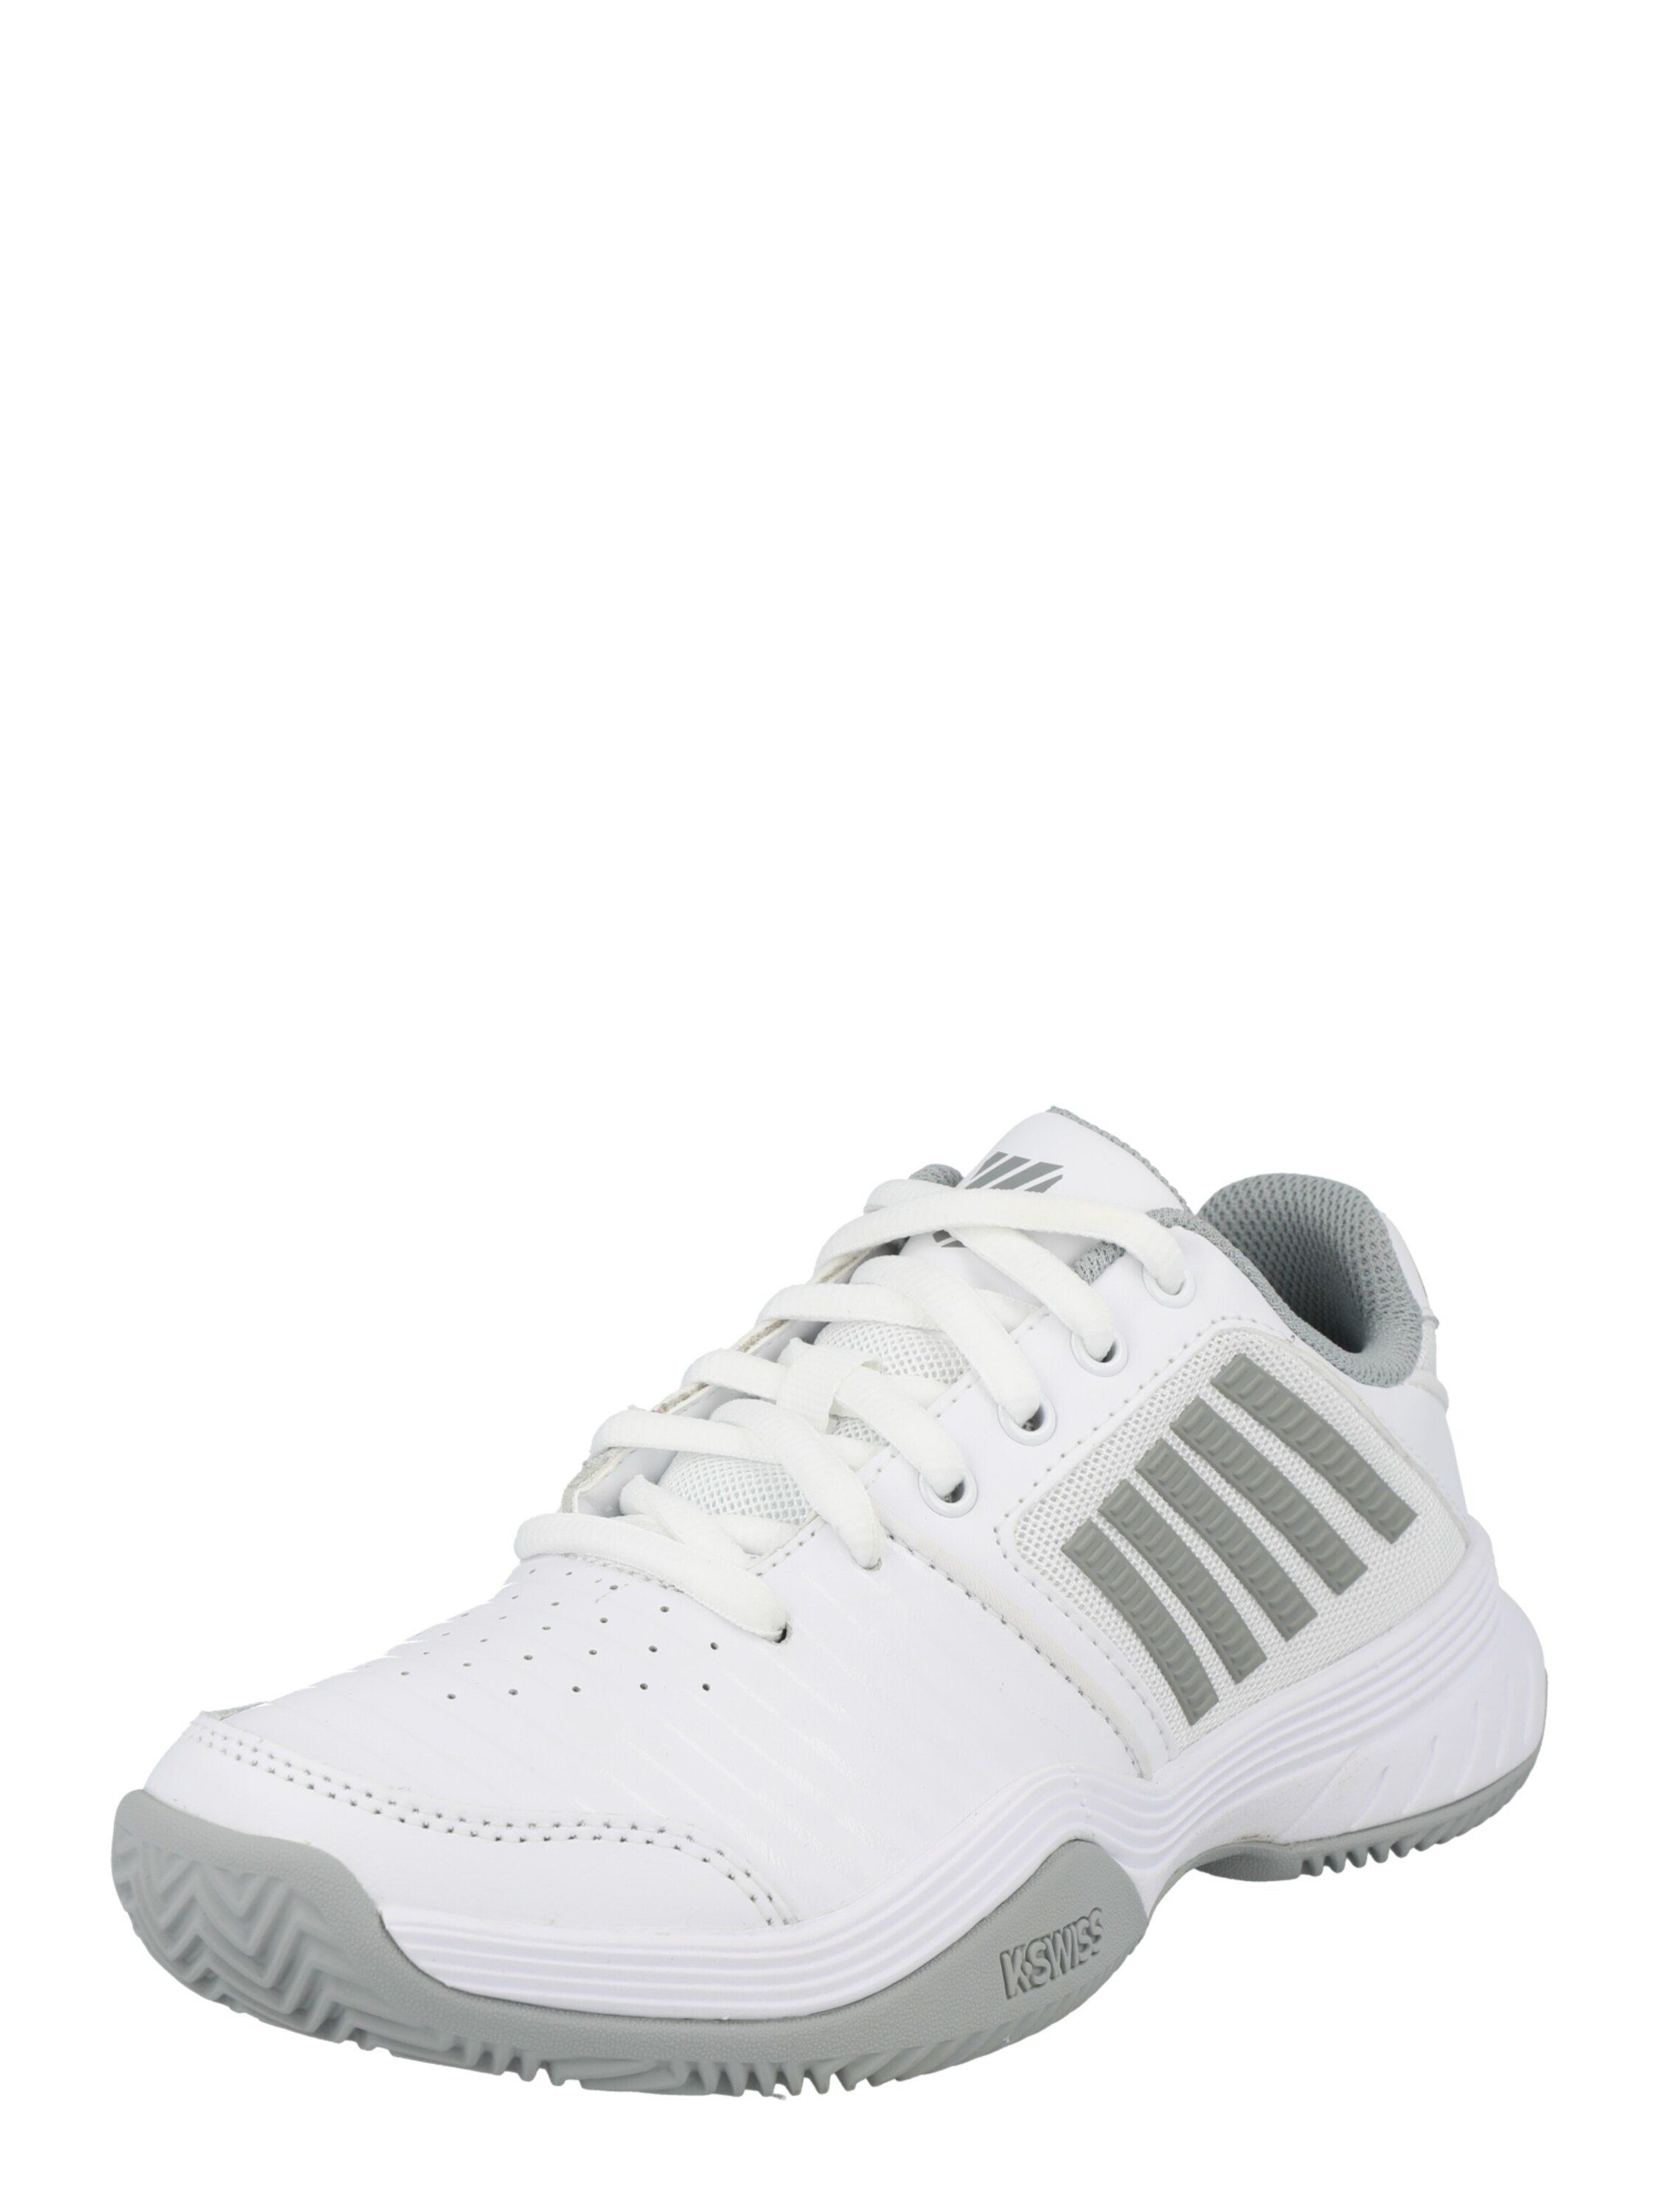 K-Swiss Performance Footwear COURT EXPRESS HB Trainingsschuh (1-tlg) WHITE/HIGHRISE/SILVER